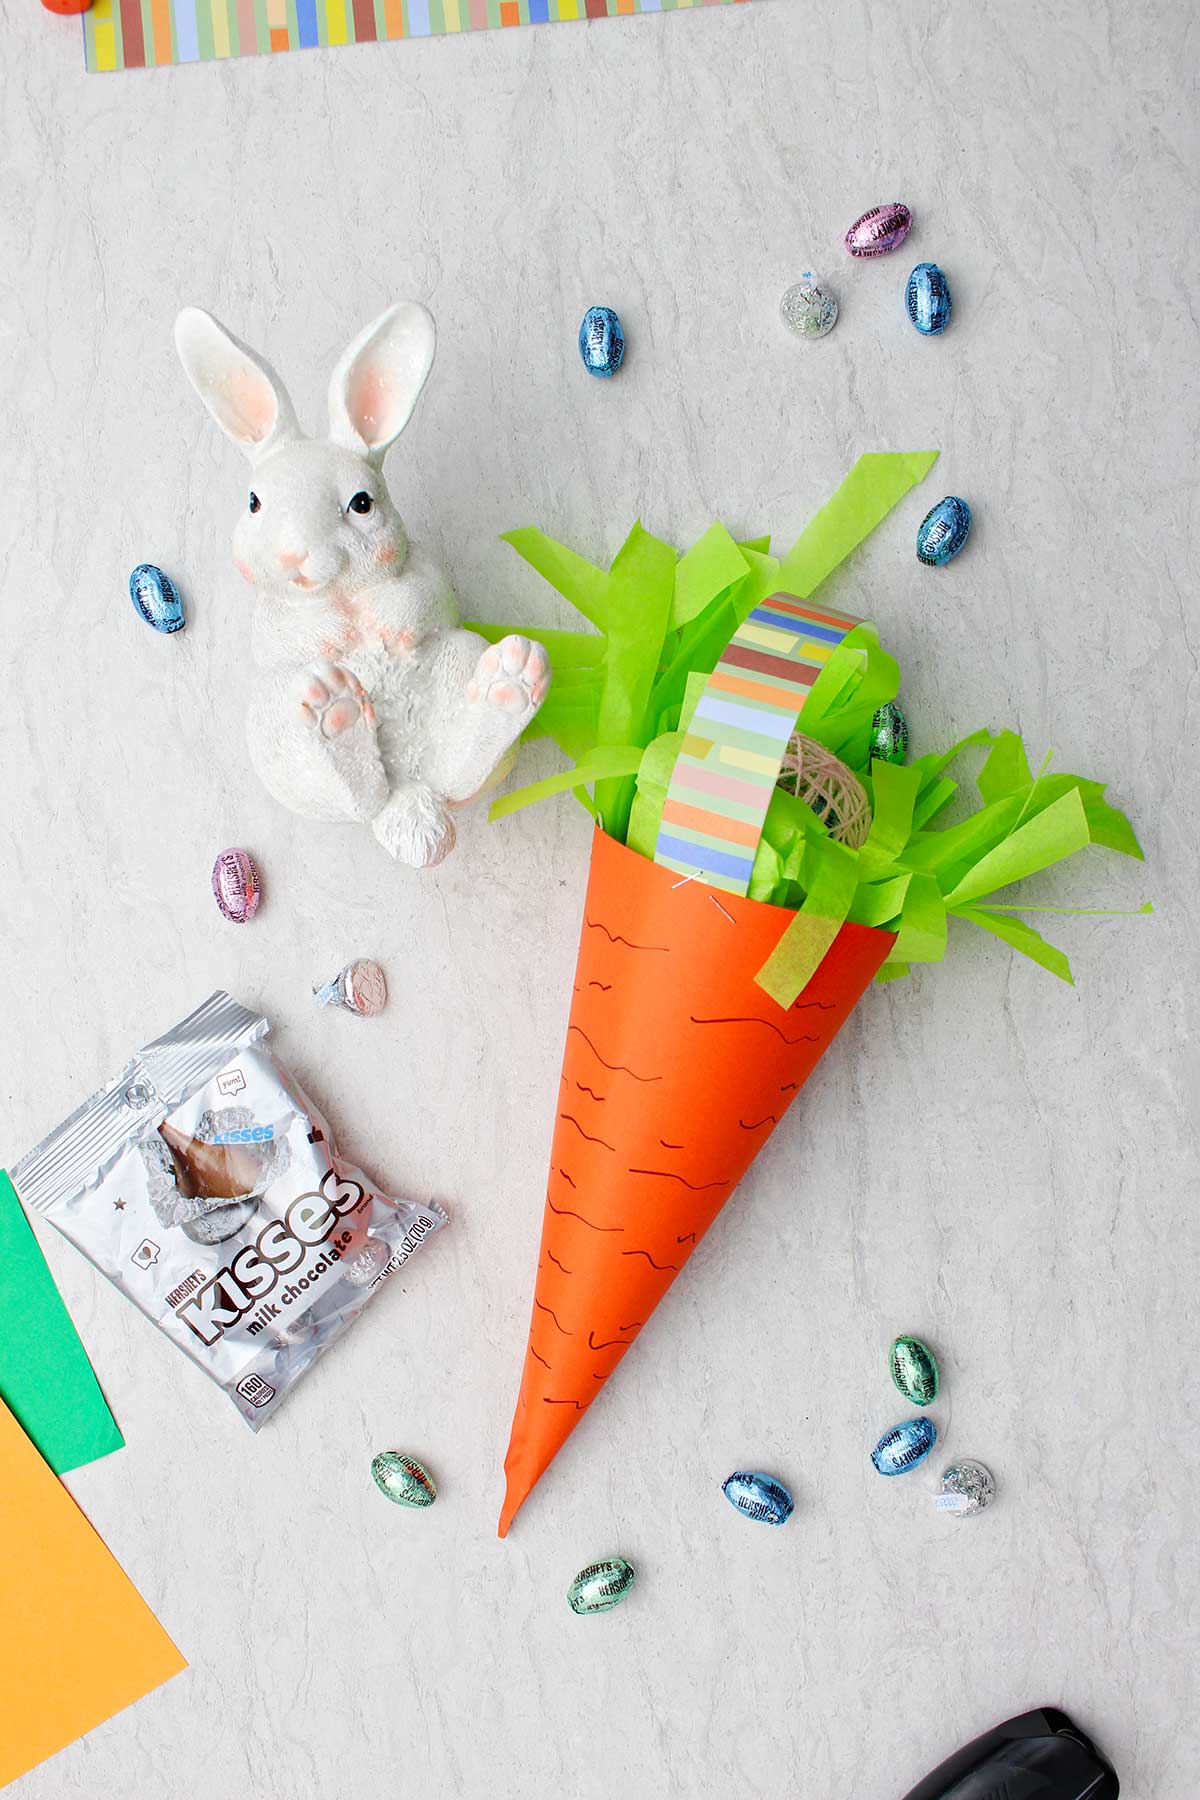 Completed large carrot Easter basket with paper grass and Easter candy inside with white bunny statue, candies and paper near by.